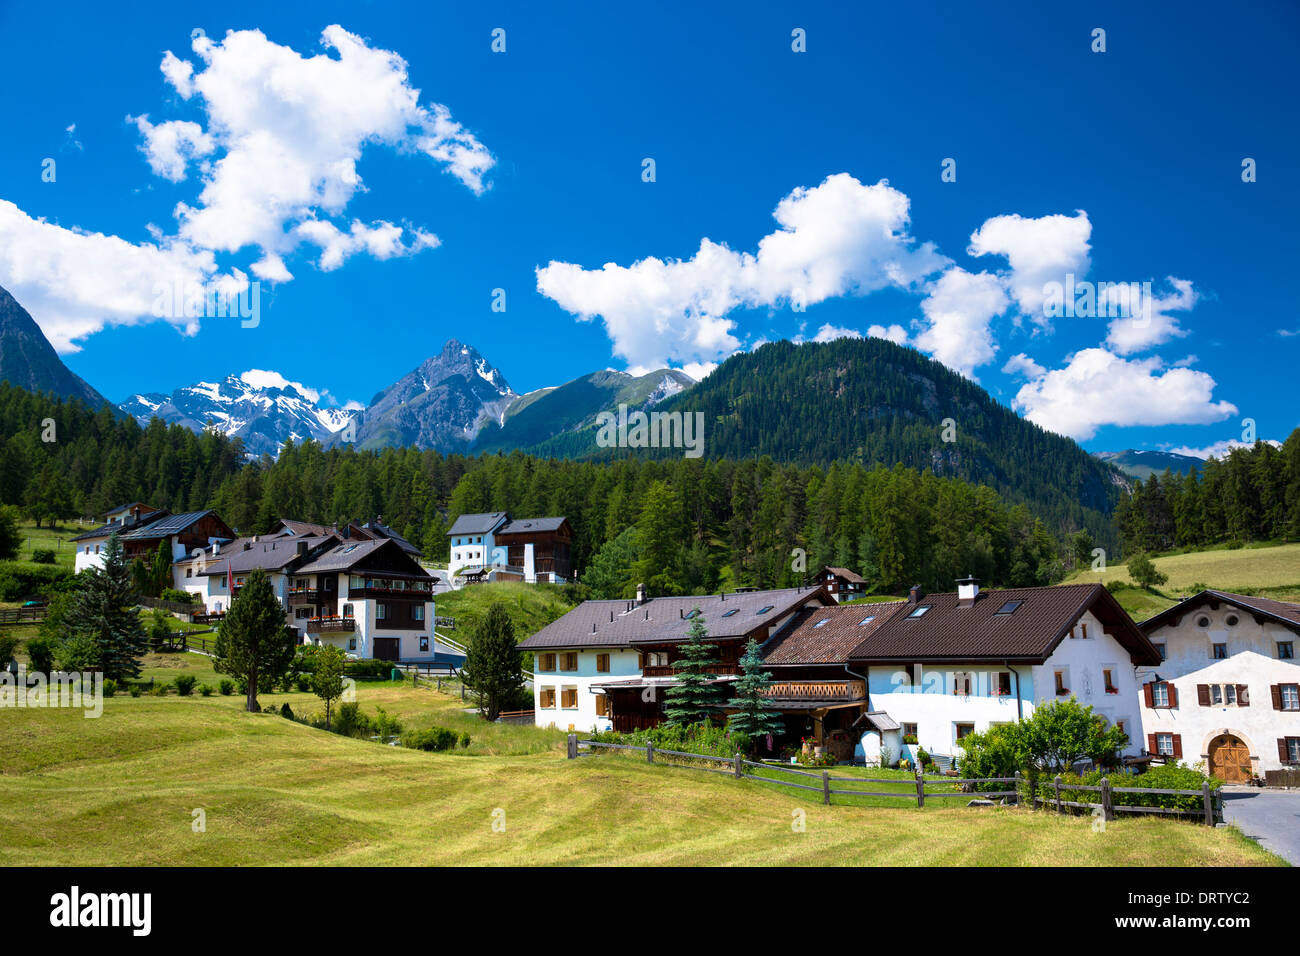 Fontana village surrounded by larch forest in the Lower Engadine Valley, Swiss Alps, Switzerland Stock Photo